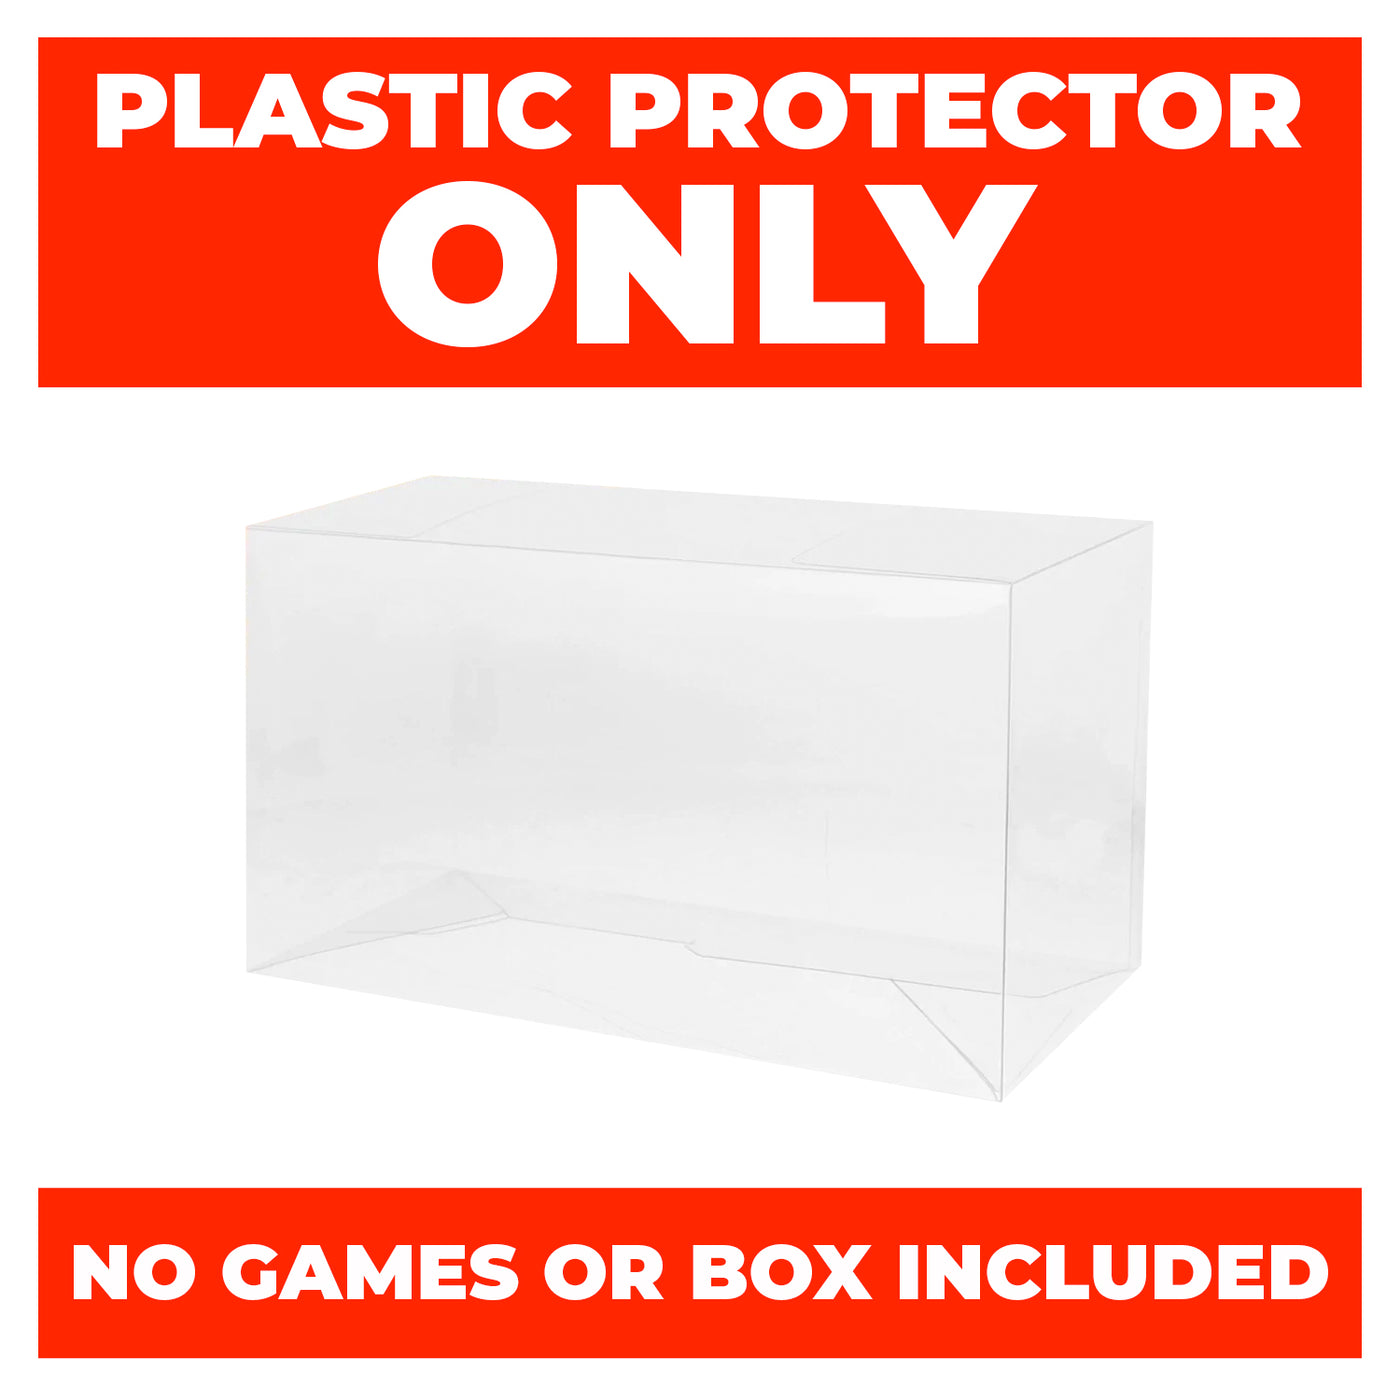 Plastic Protector for ATARI, COLECOVISION Video Game Box 0.50mm thick, UV & Scratch Resistant on The Pop Protector Guide by Display Geek